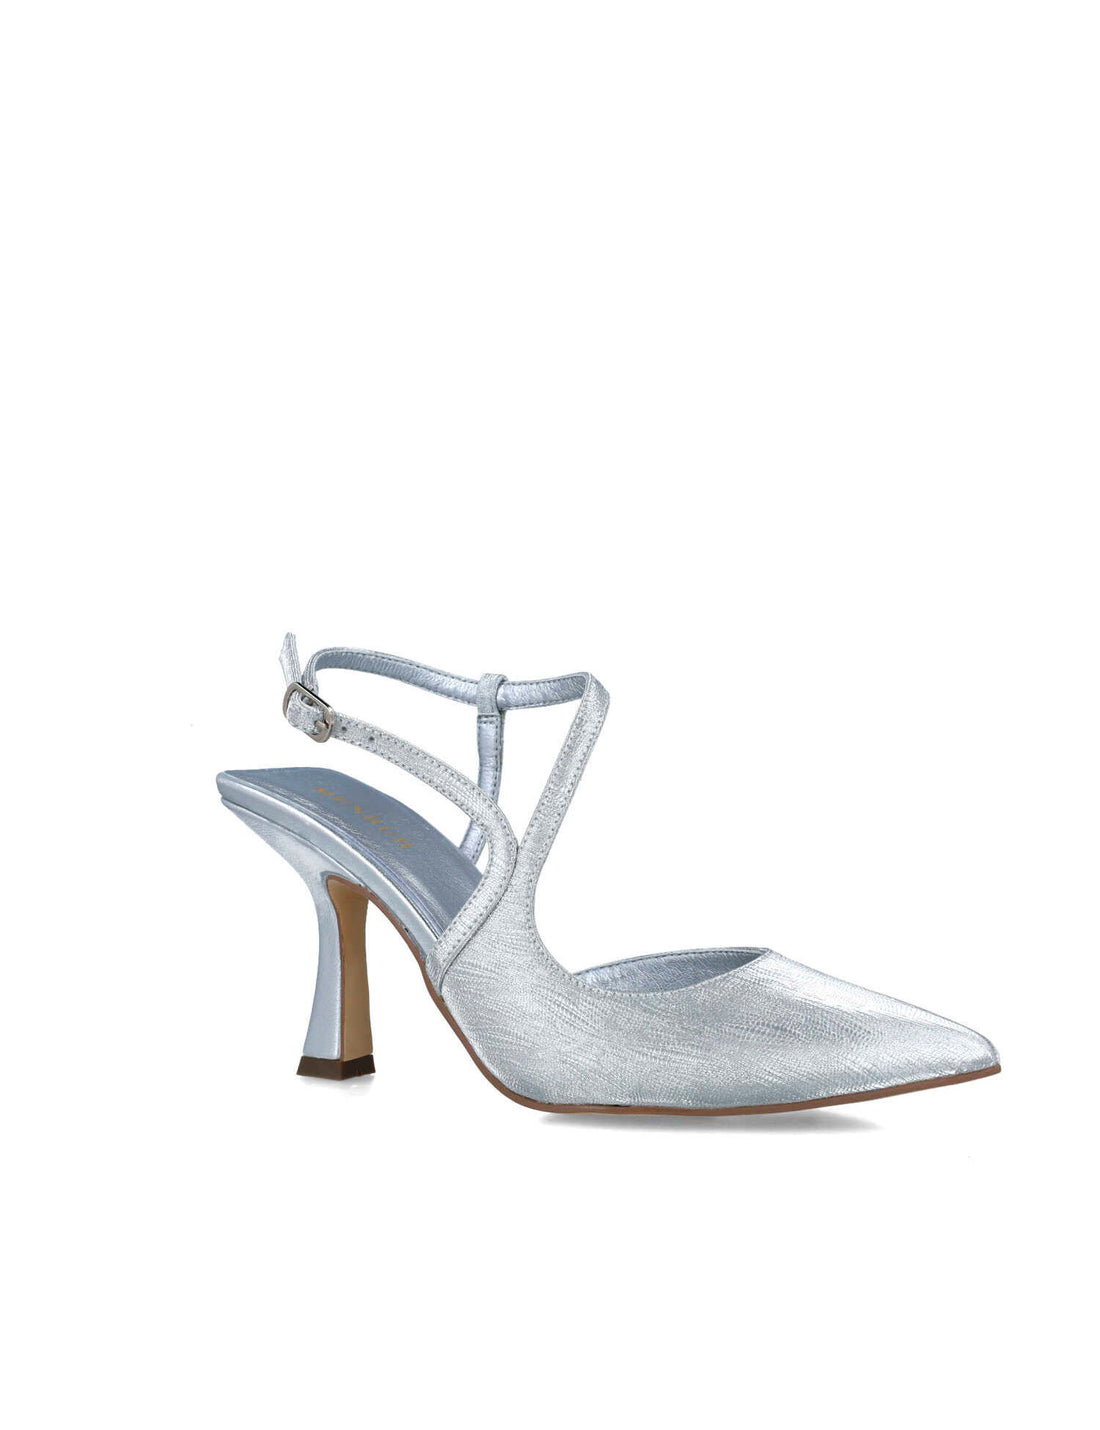 Silver Pumps With Ankle Strap_24767_09_02